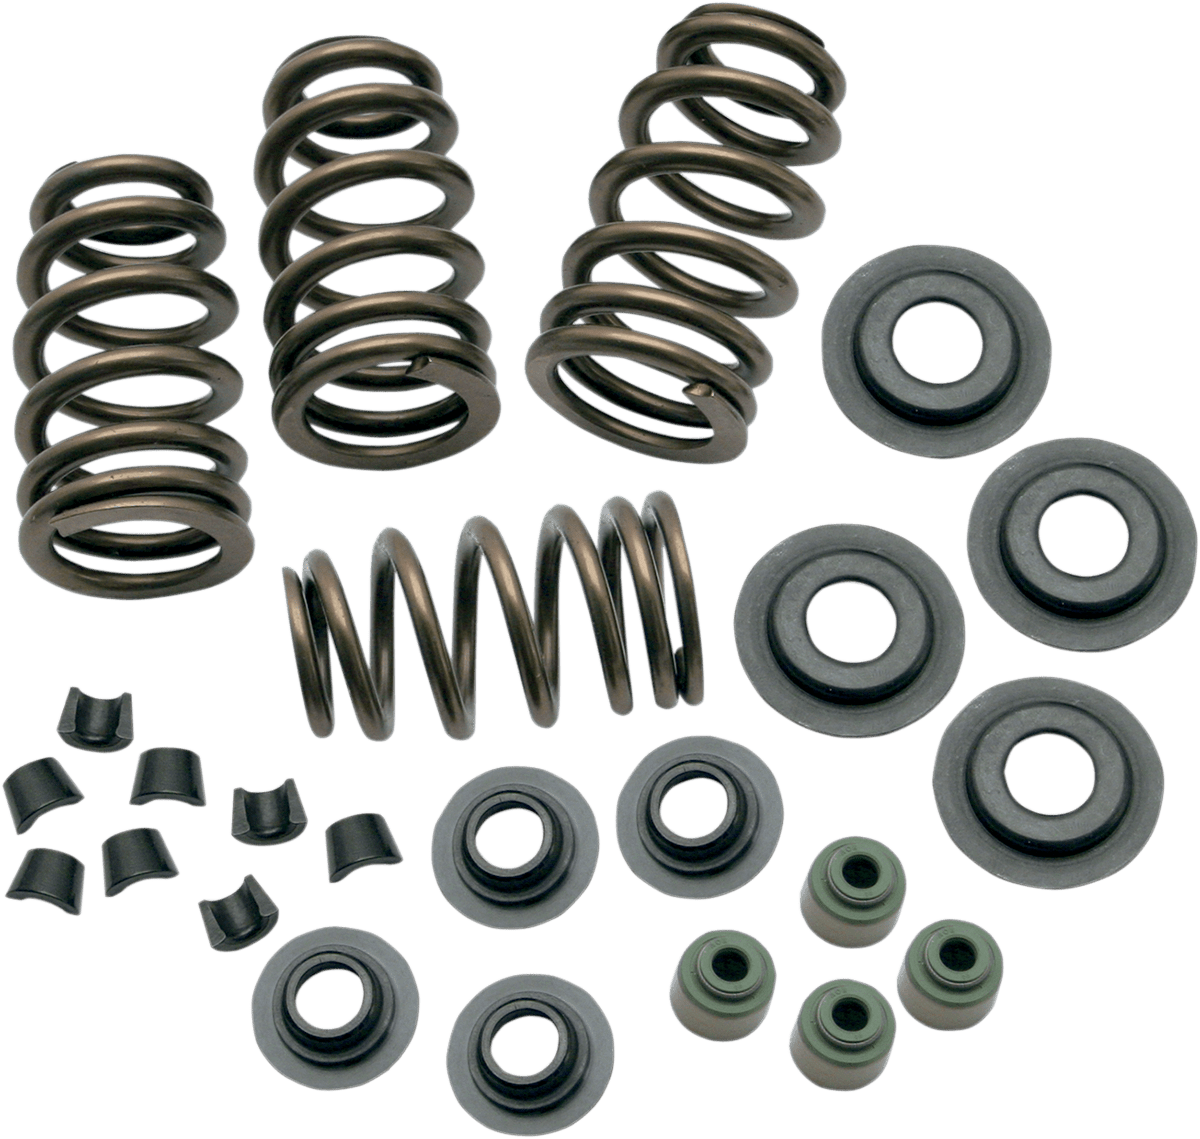 S&S CYCLES-Sidewinder® .650" Valve Spring Kits / '88-'17 Models-Valve Springs / Retainers / Seals-MetalCore Harley Supply